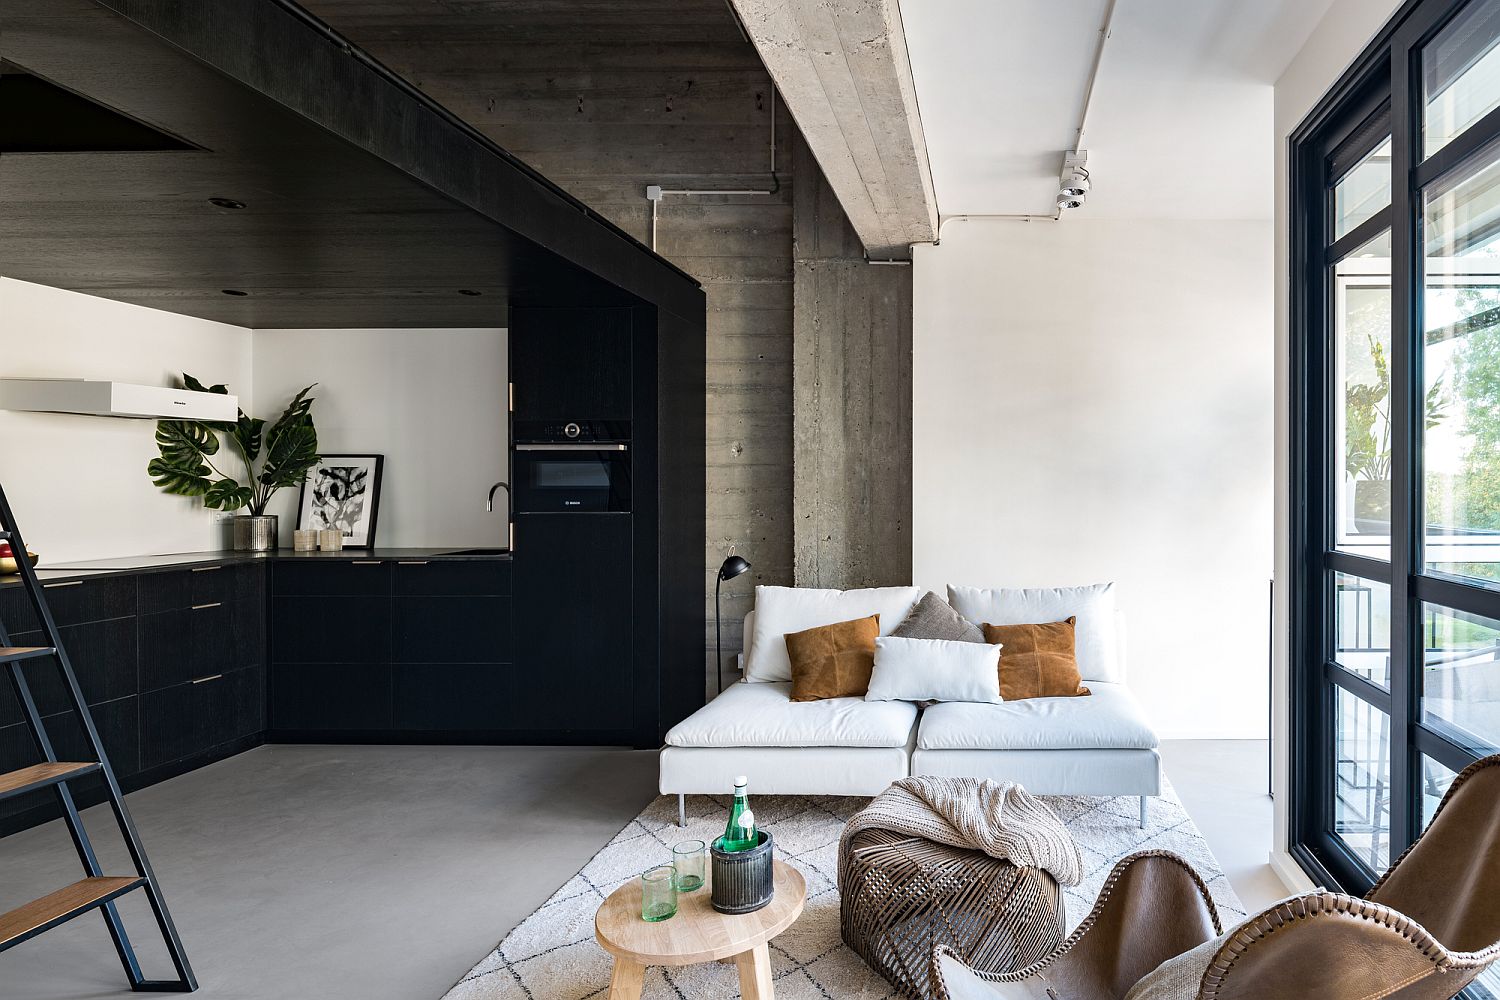 Combining raw concrete with polished modern finishes inside the posh loft